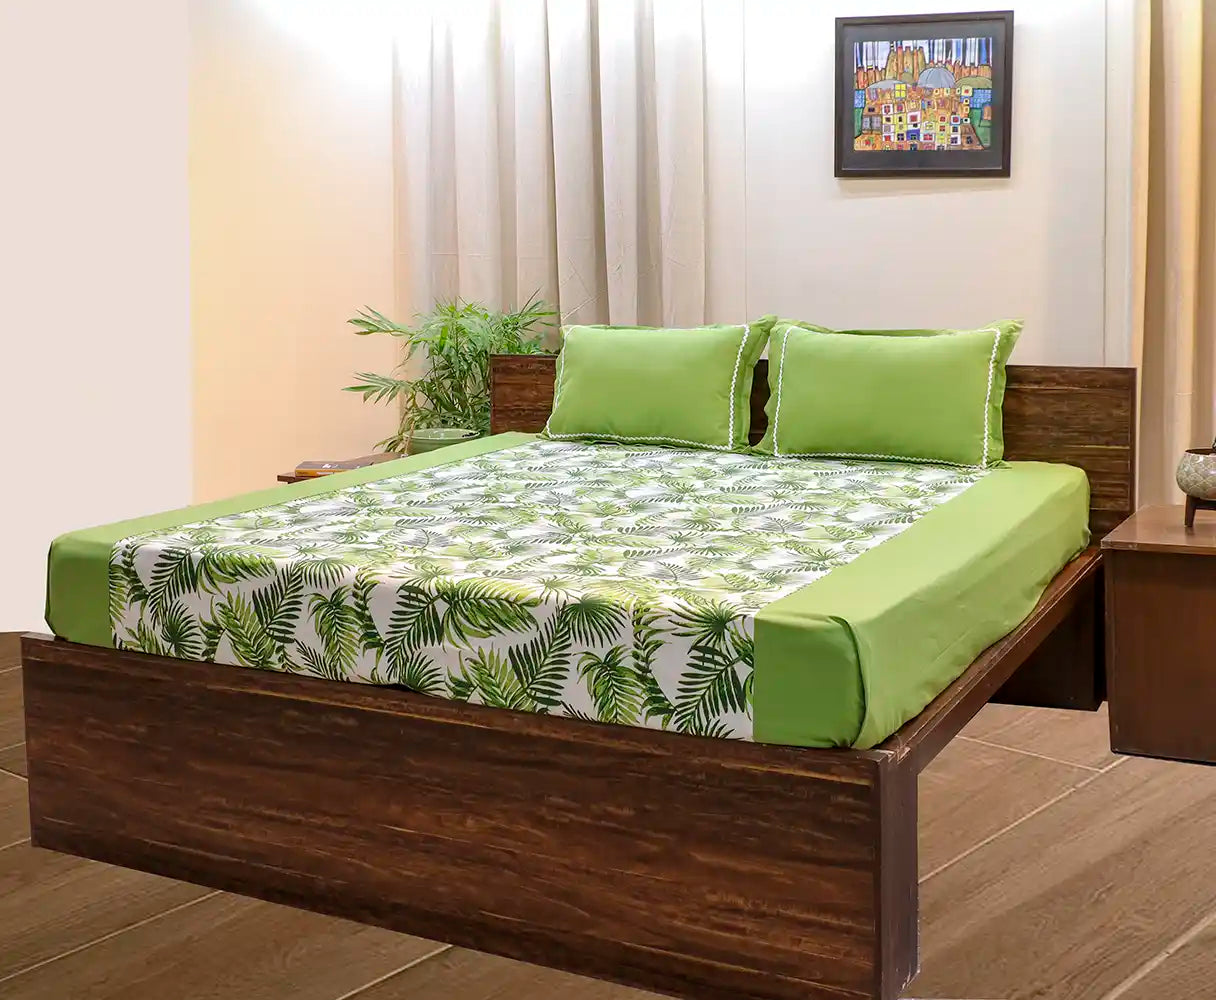 Tropical Paradise Bed Cover - Set of 3 - Furnishing & Utilities - 6